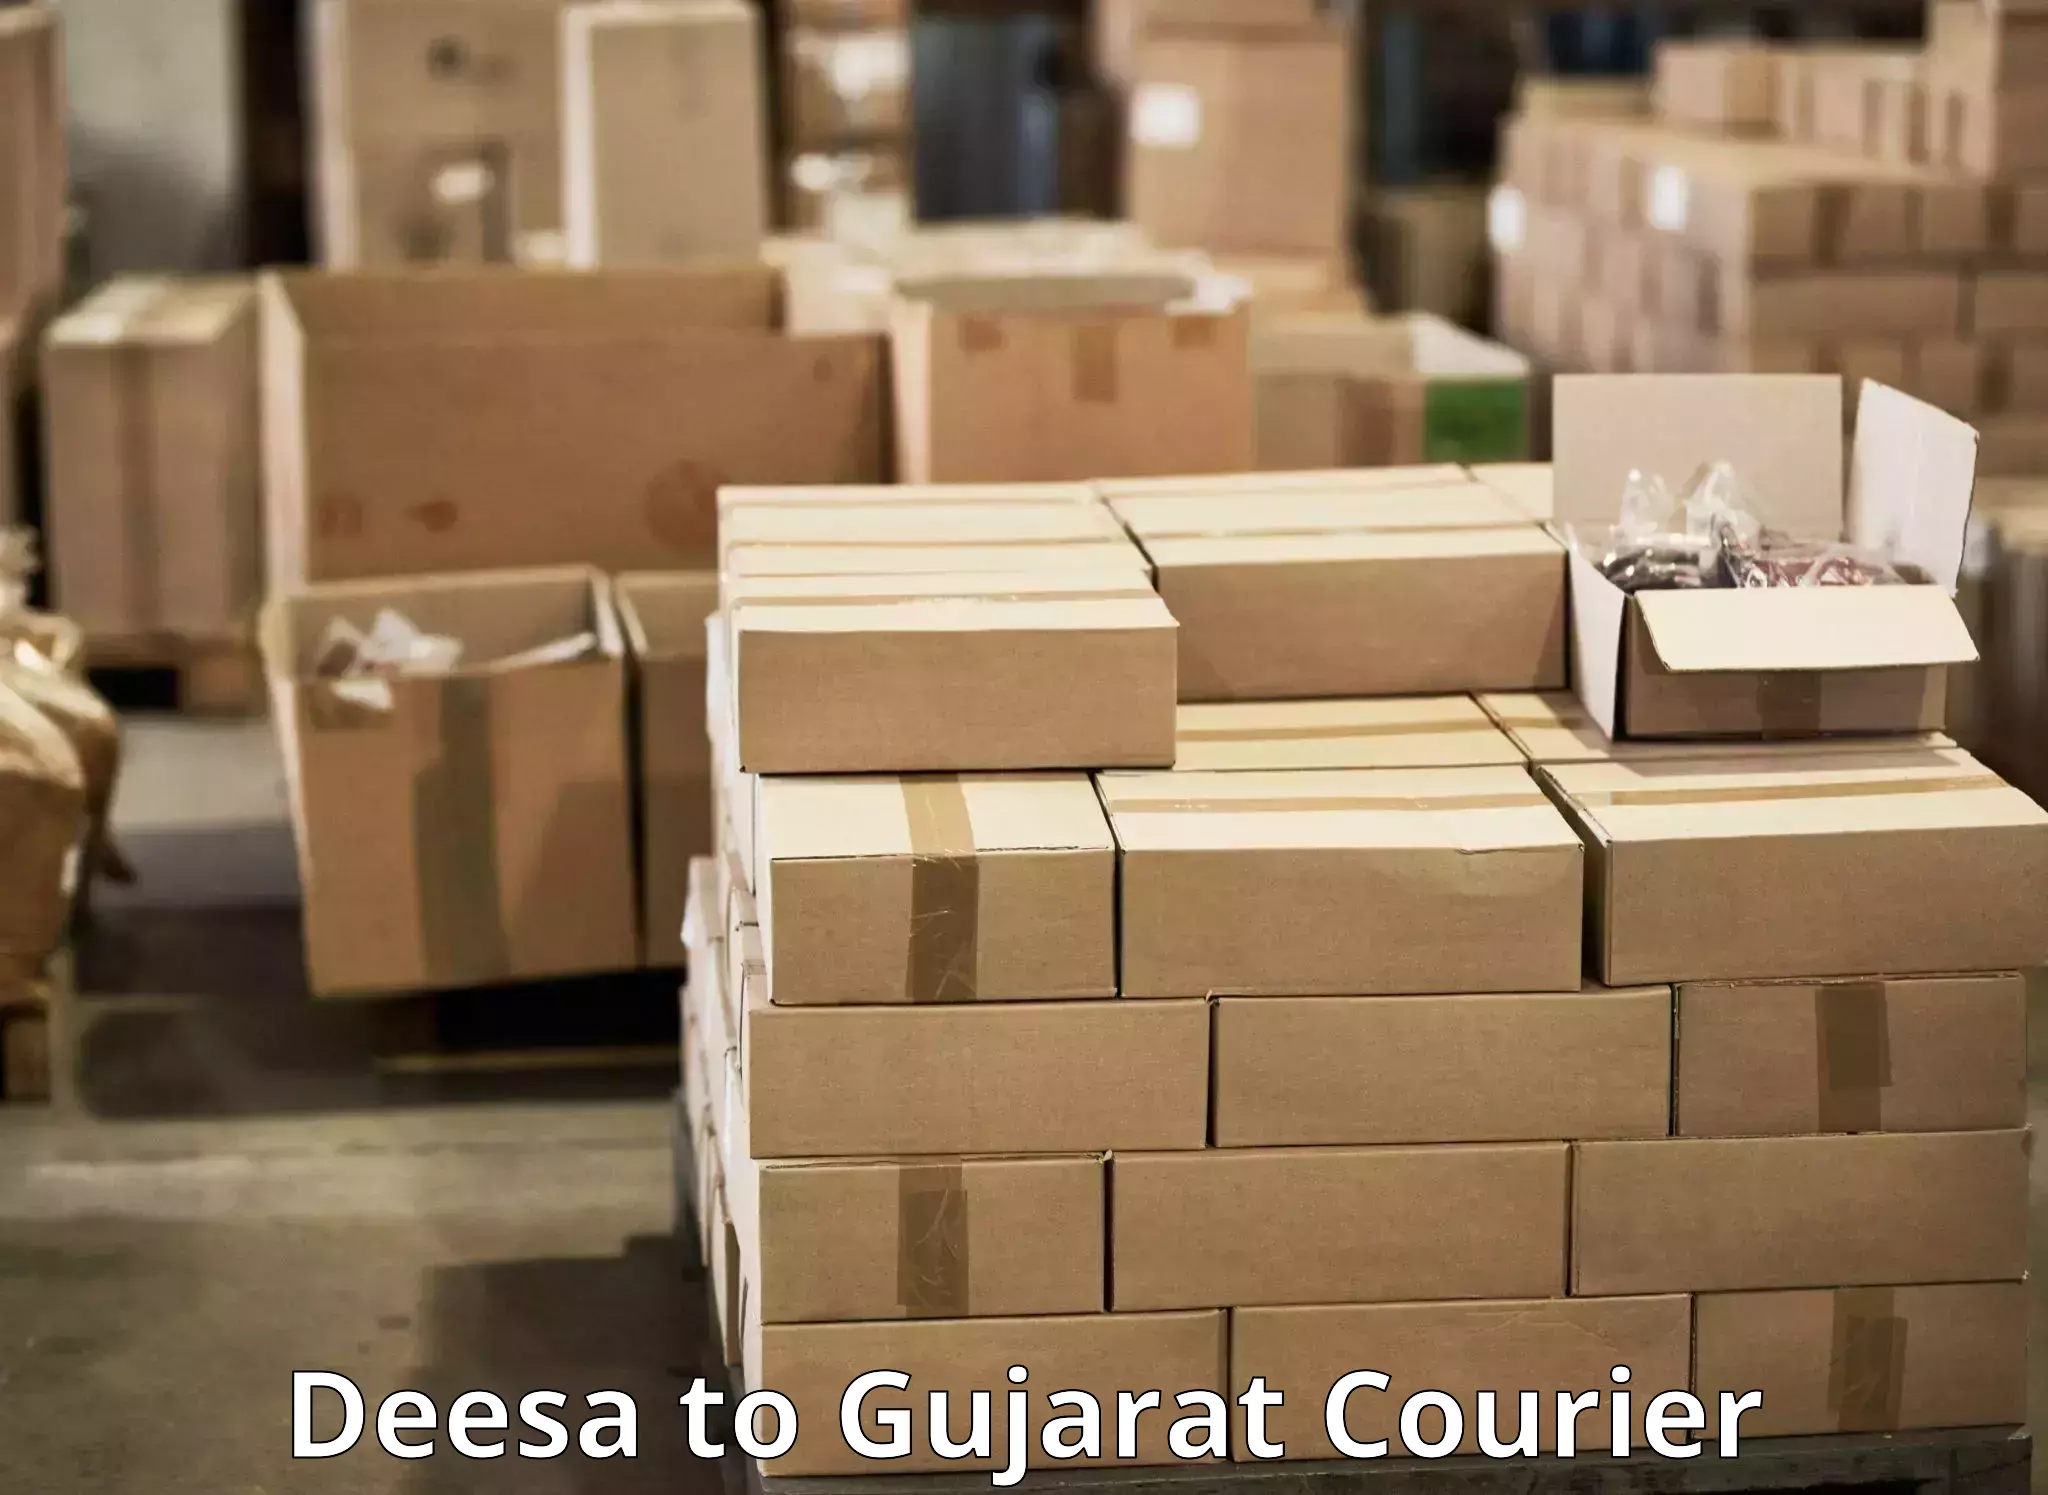 End-to-end delivery Deesa to Gujarat